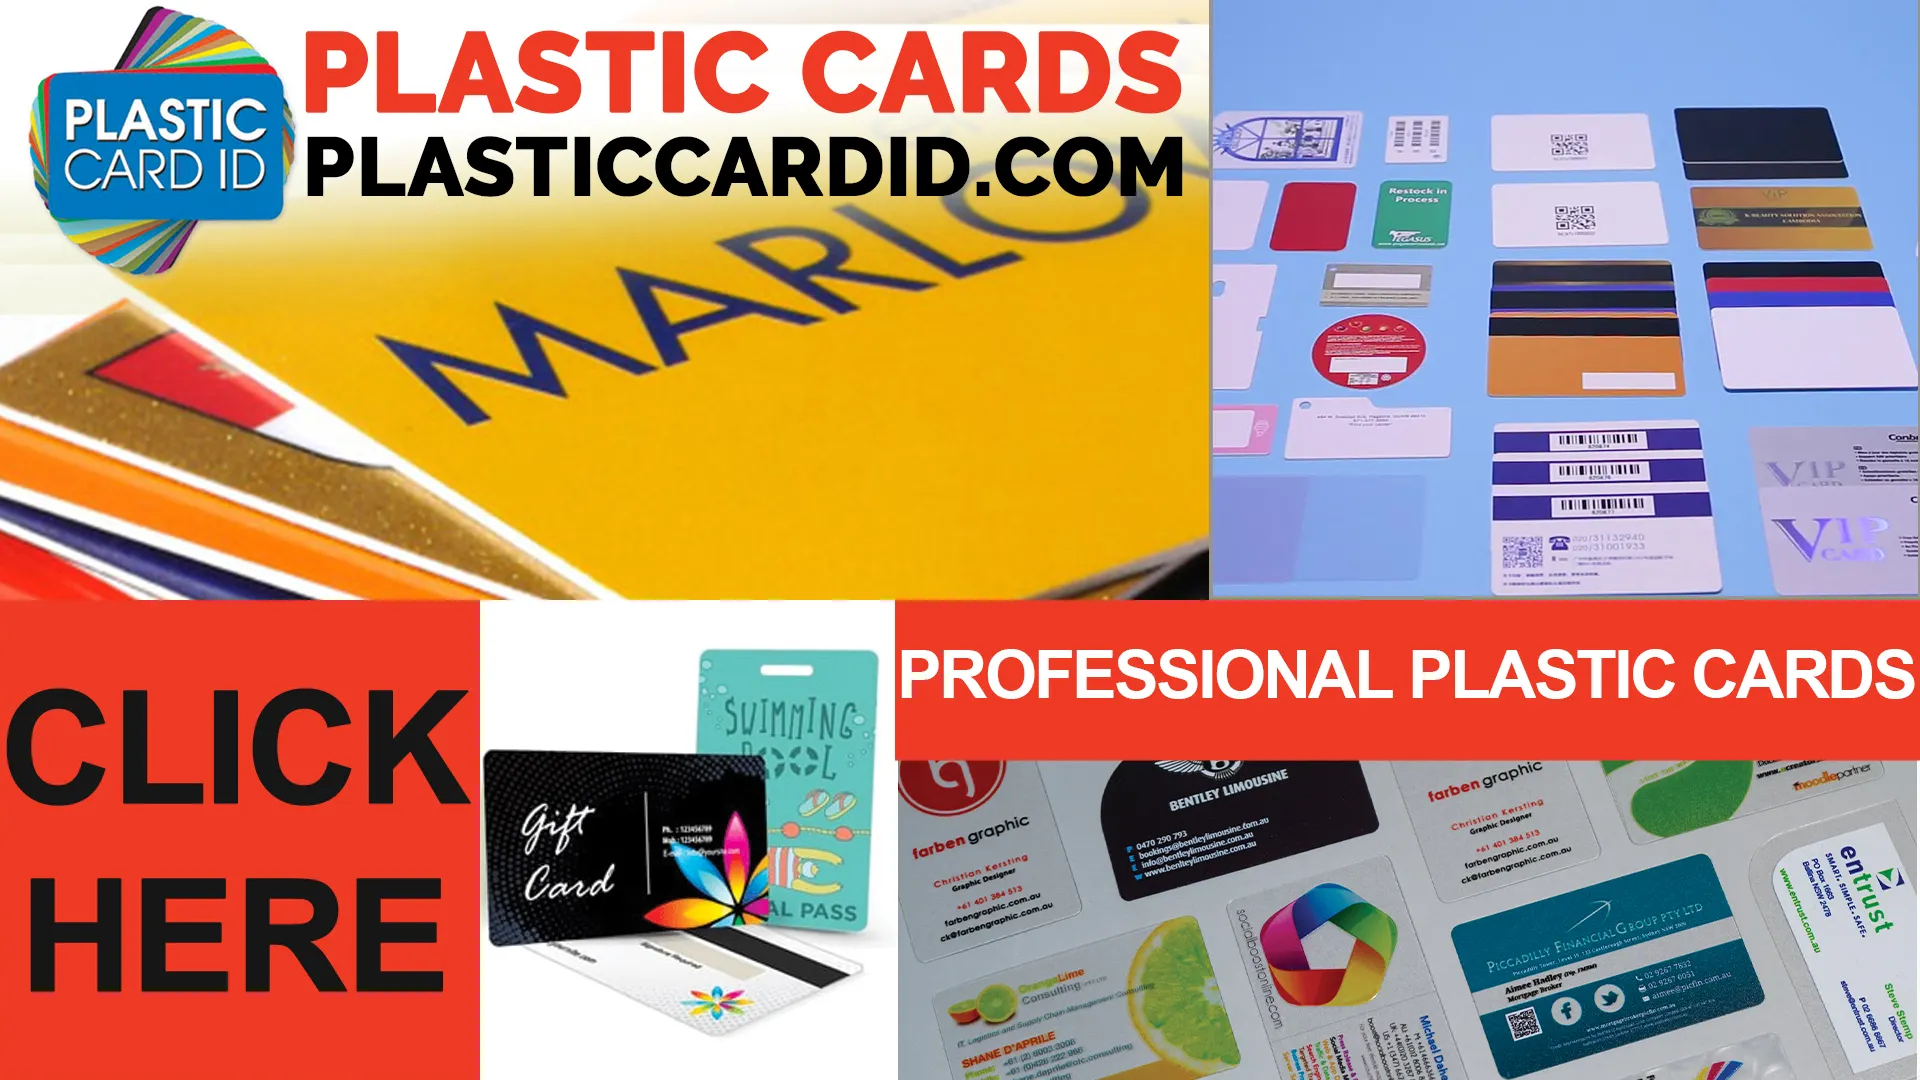 The Spectrum of Our Plastic Card Expertise